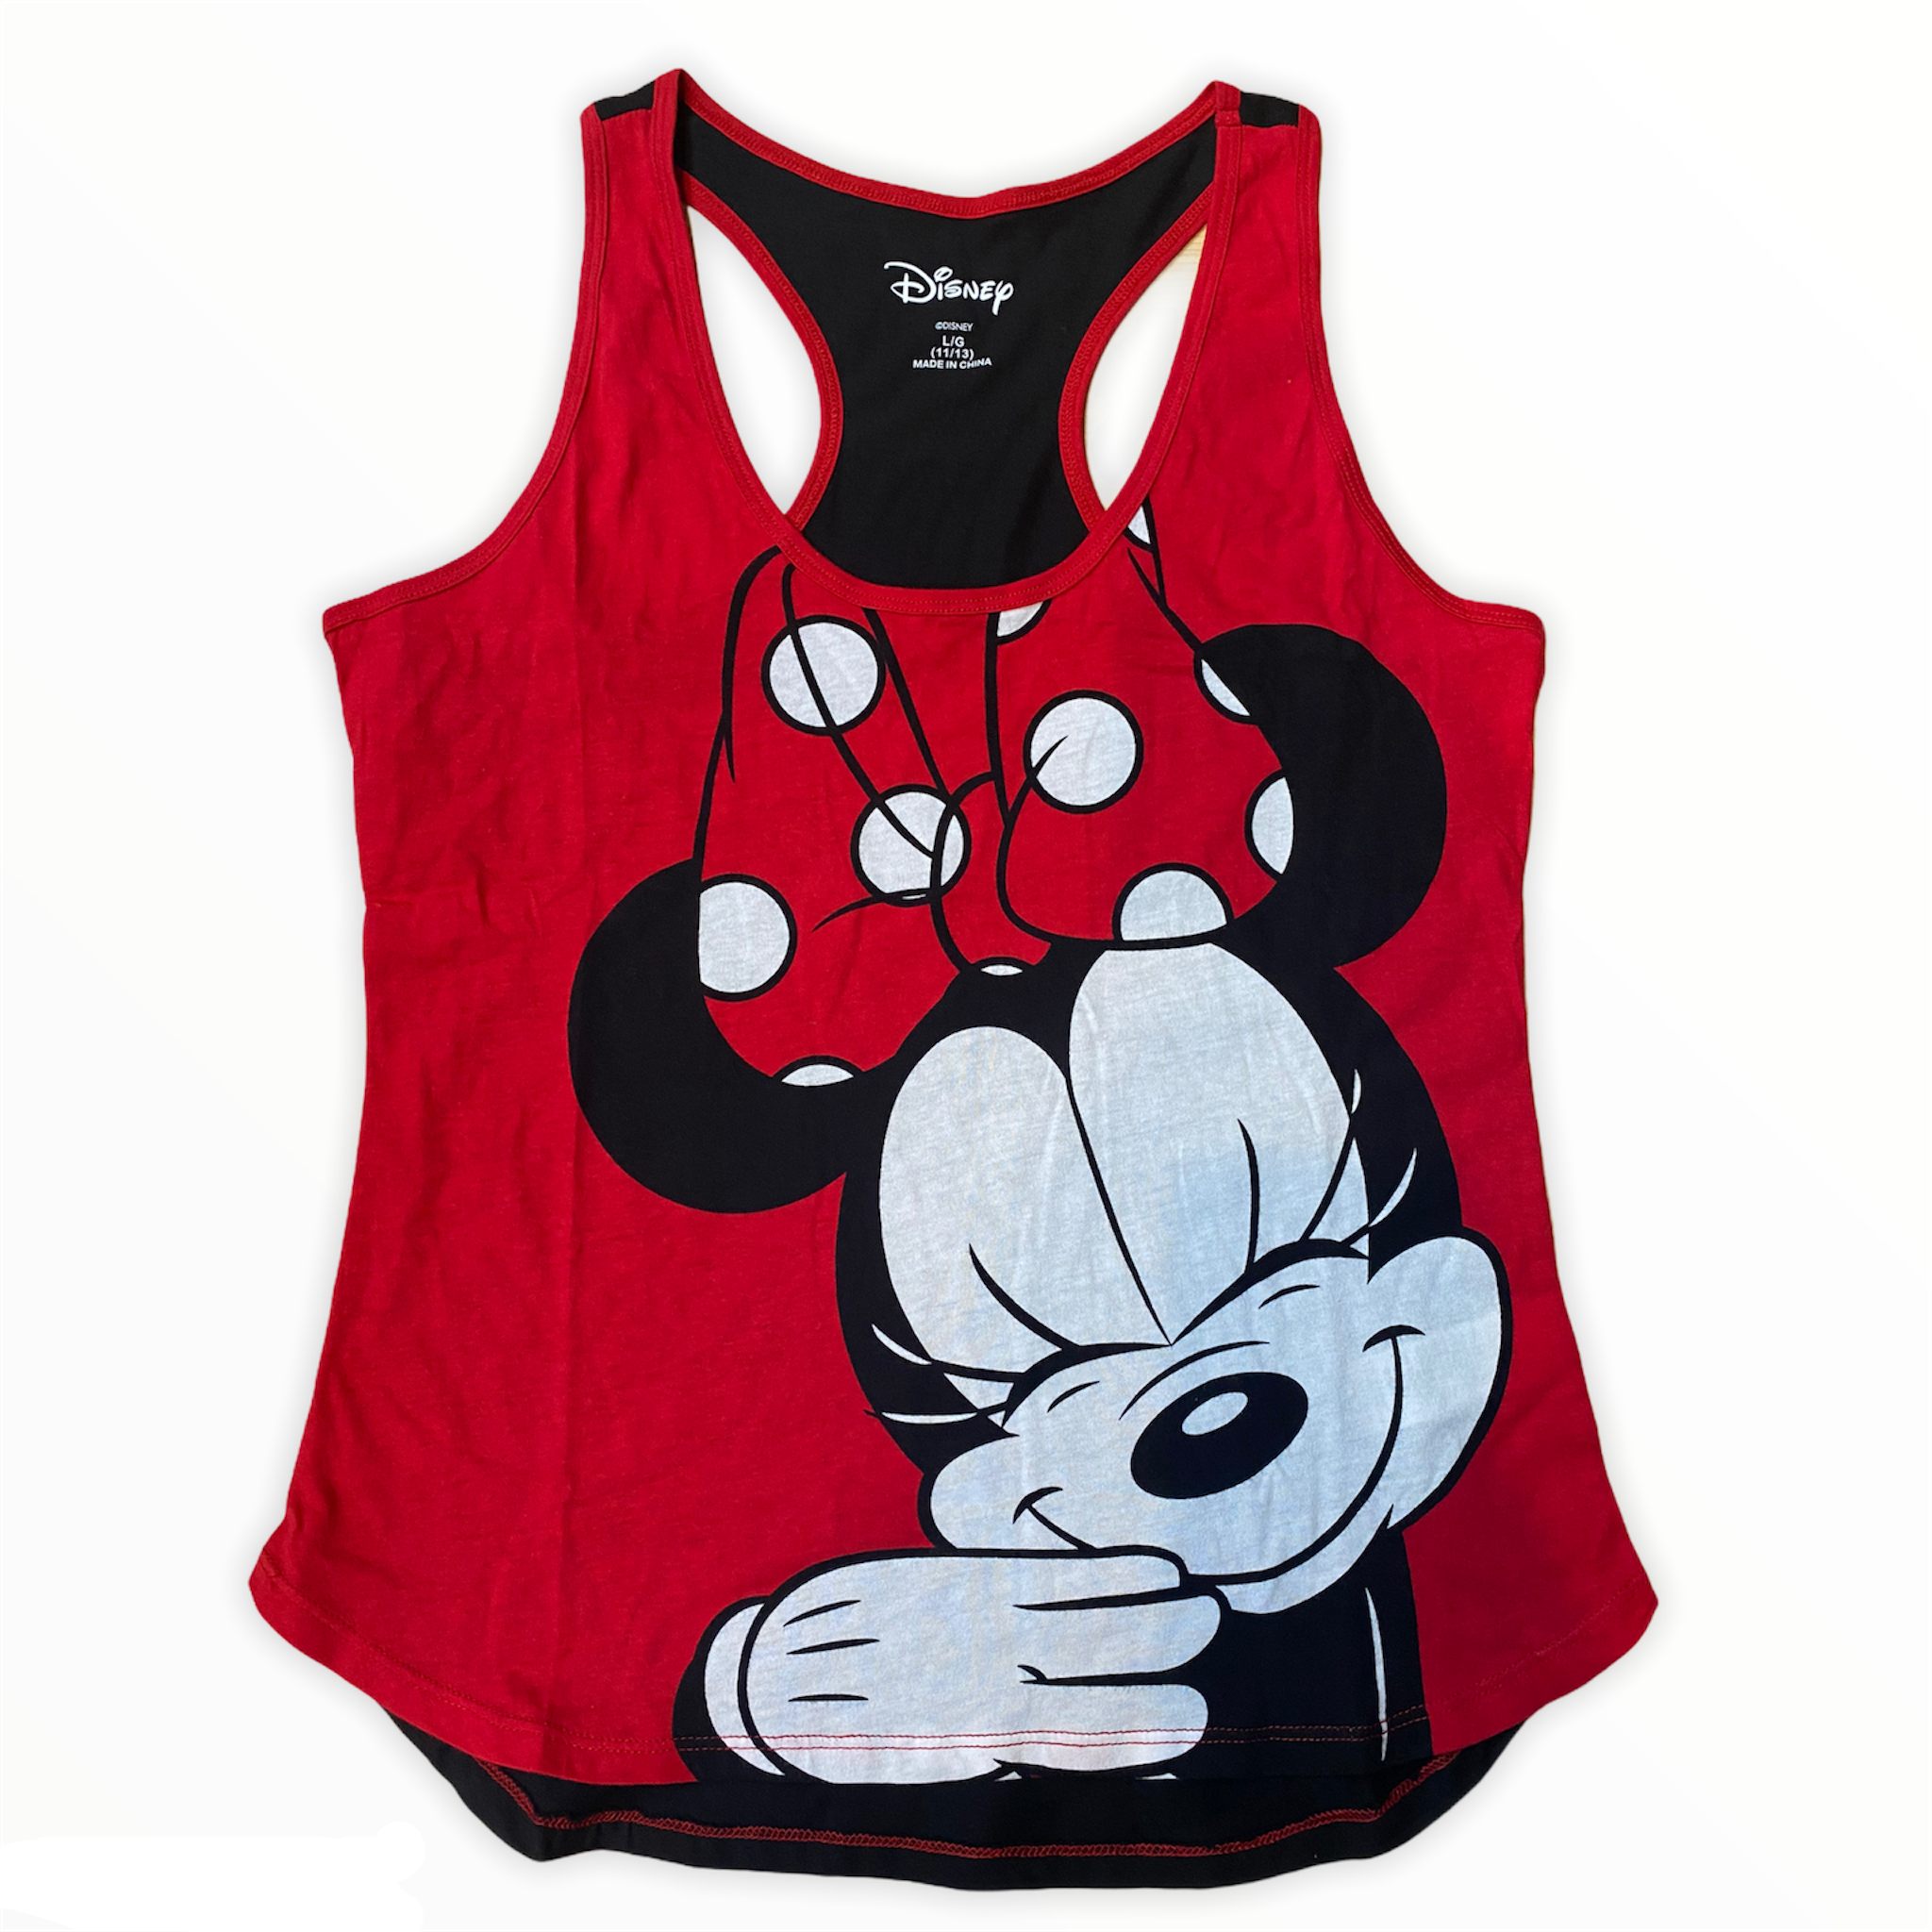 Minnie Mouse Big Face Tank Top, Red